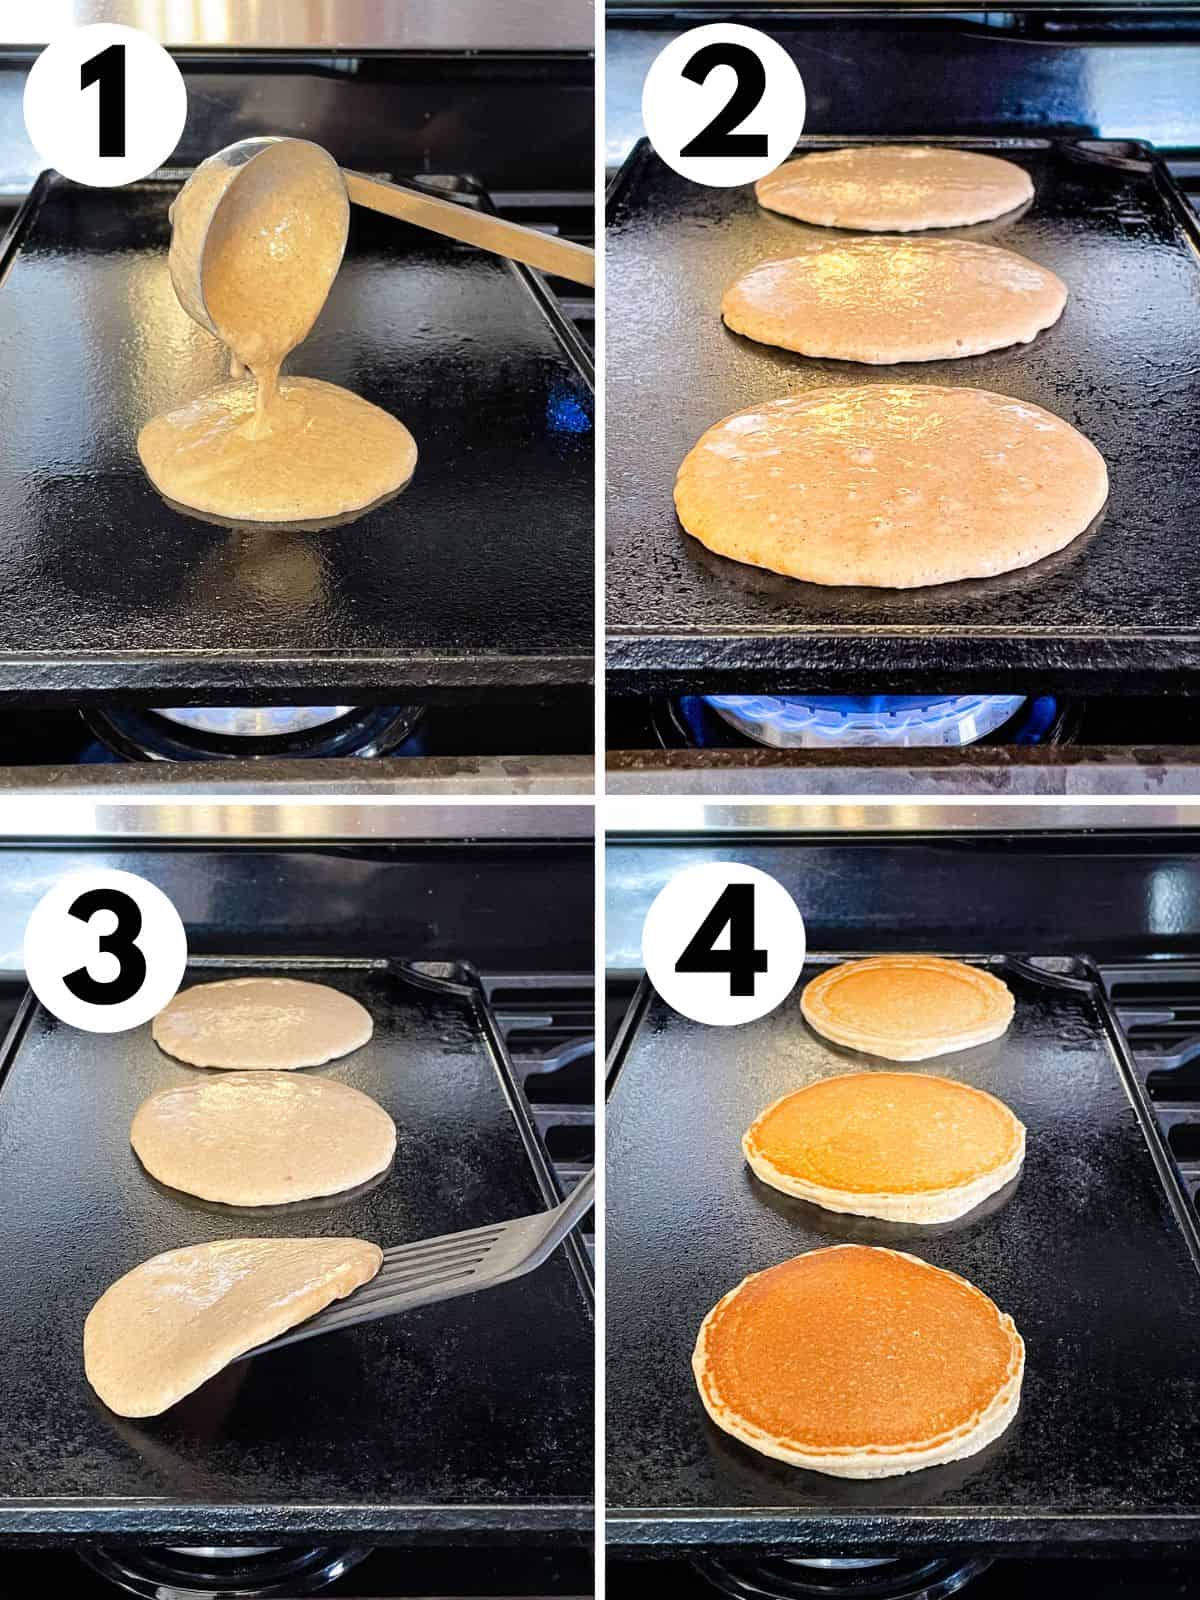 Four images showing pouring oat flour pancake batter on a griddle. The pancakes cooking. A pancake being flipped and three cooked pancakes.